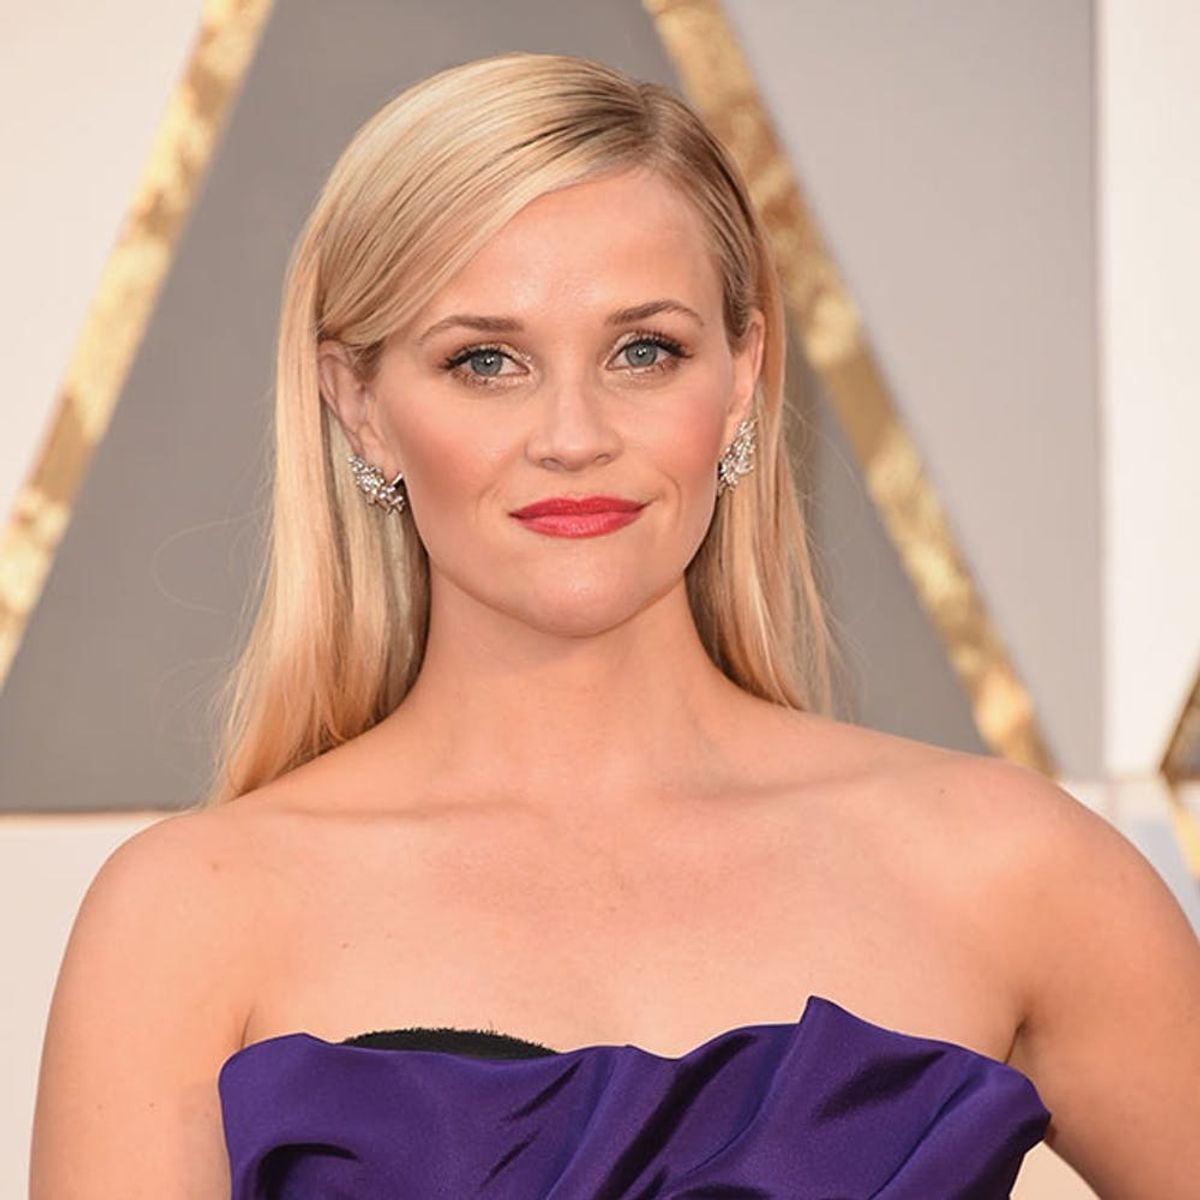 You’ll Never Guess Which Two Celebs Are *Seriously* Twinning at the Oscars